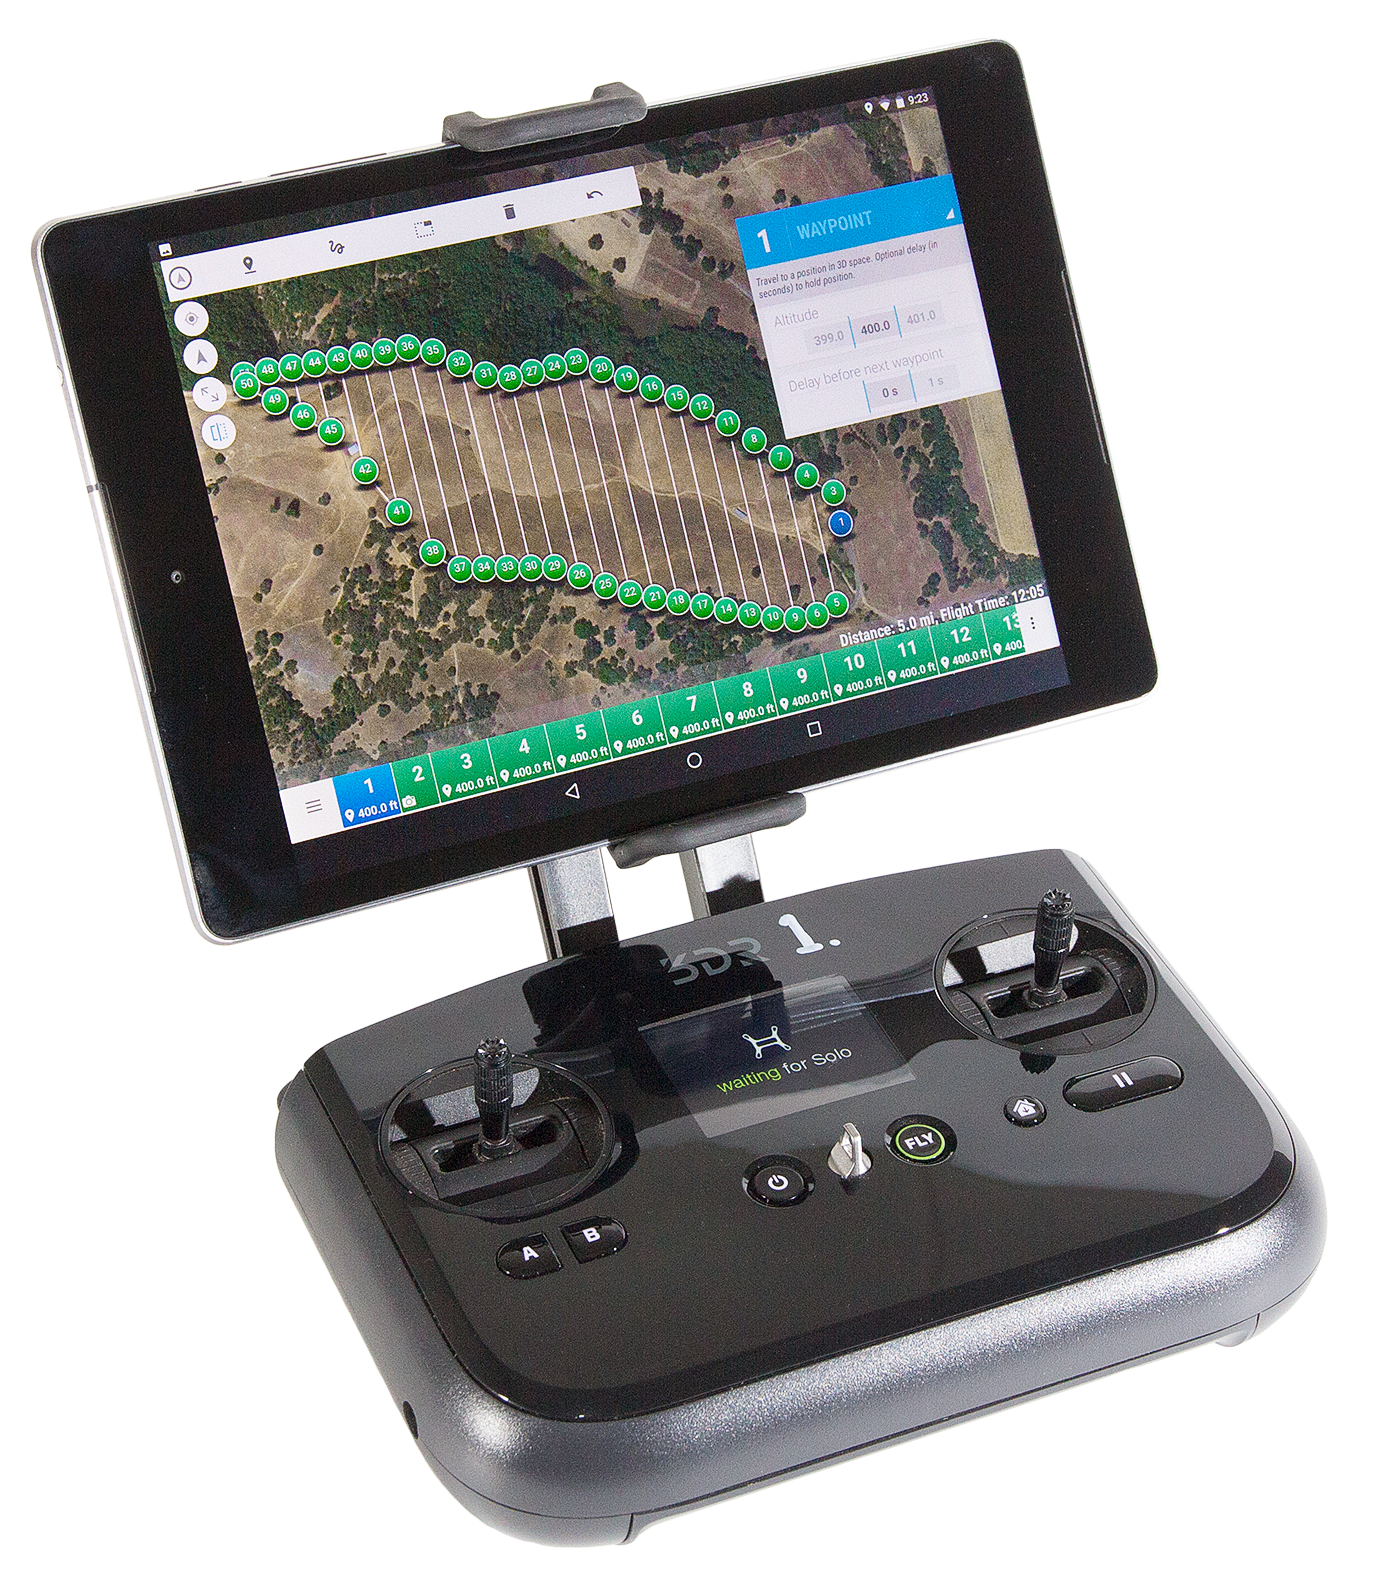 Controller for a DJI Inspire 1 drone. The attached tablet shows an inflight view and other information.